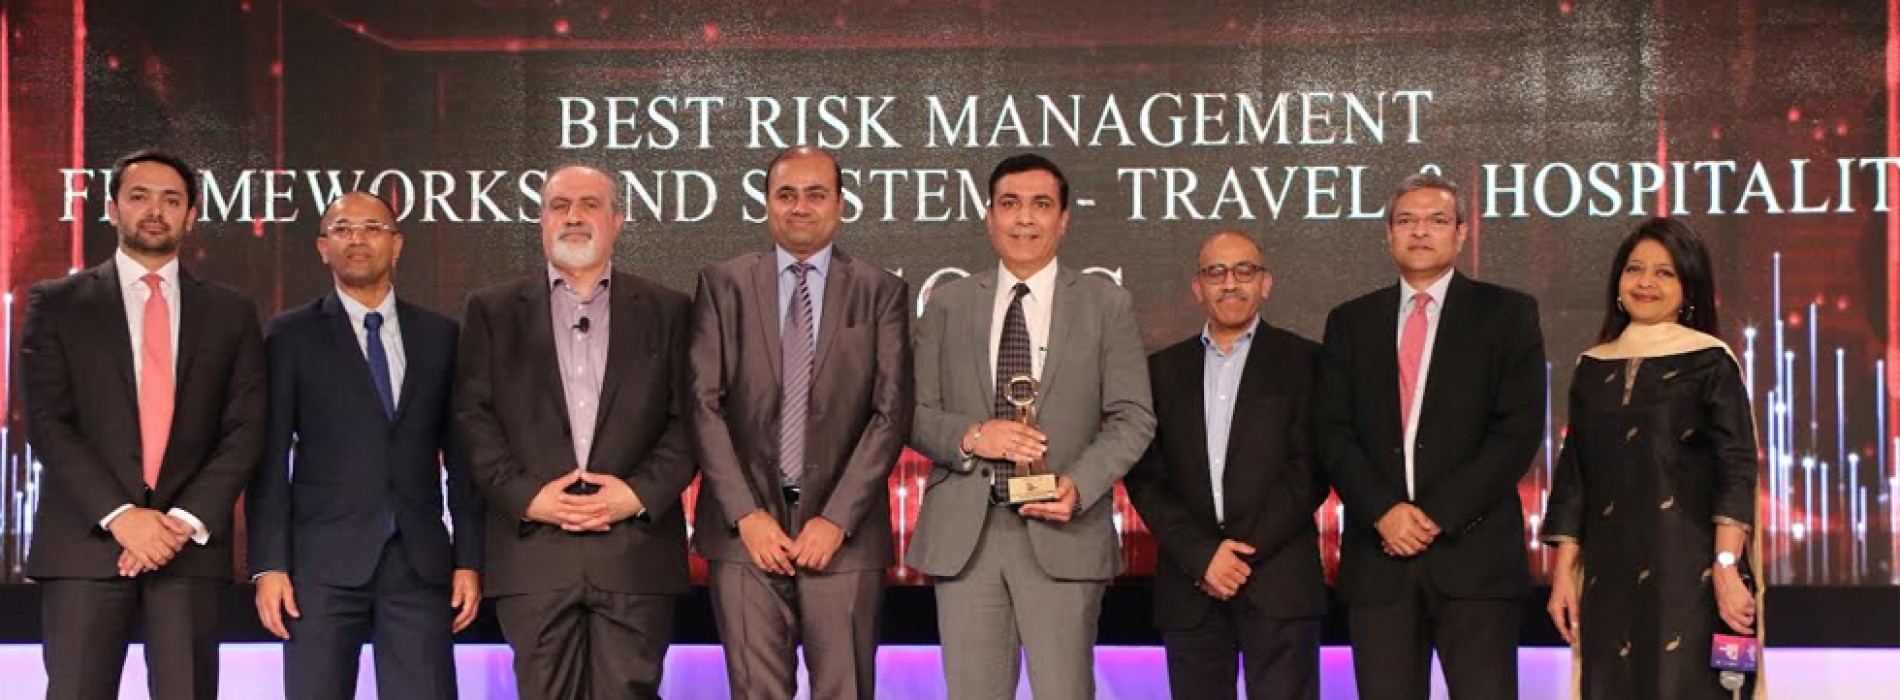 SOTC wins Best Travel and Hospitality Risk Management Award 2017